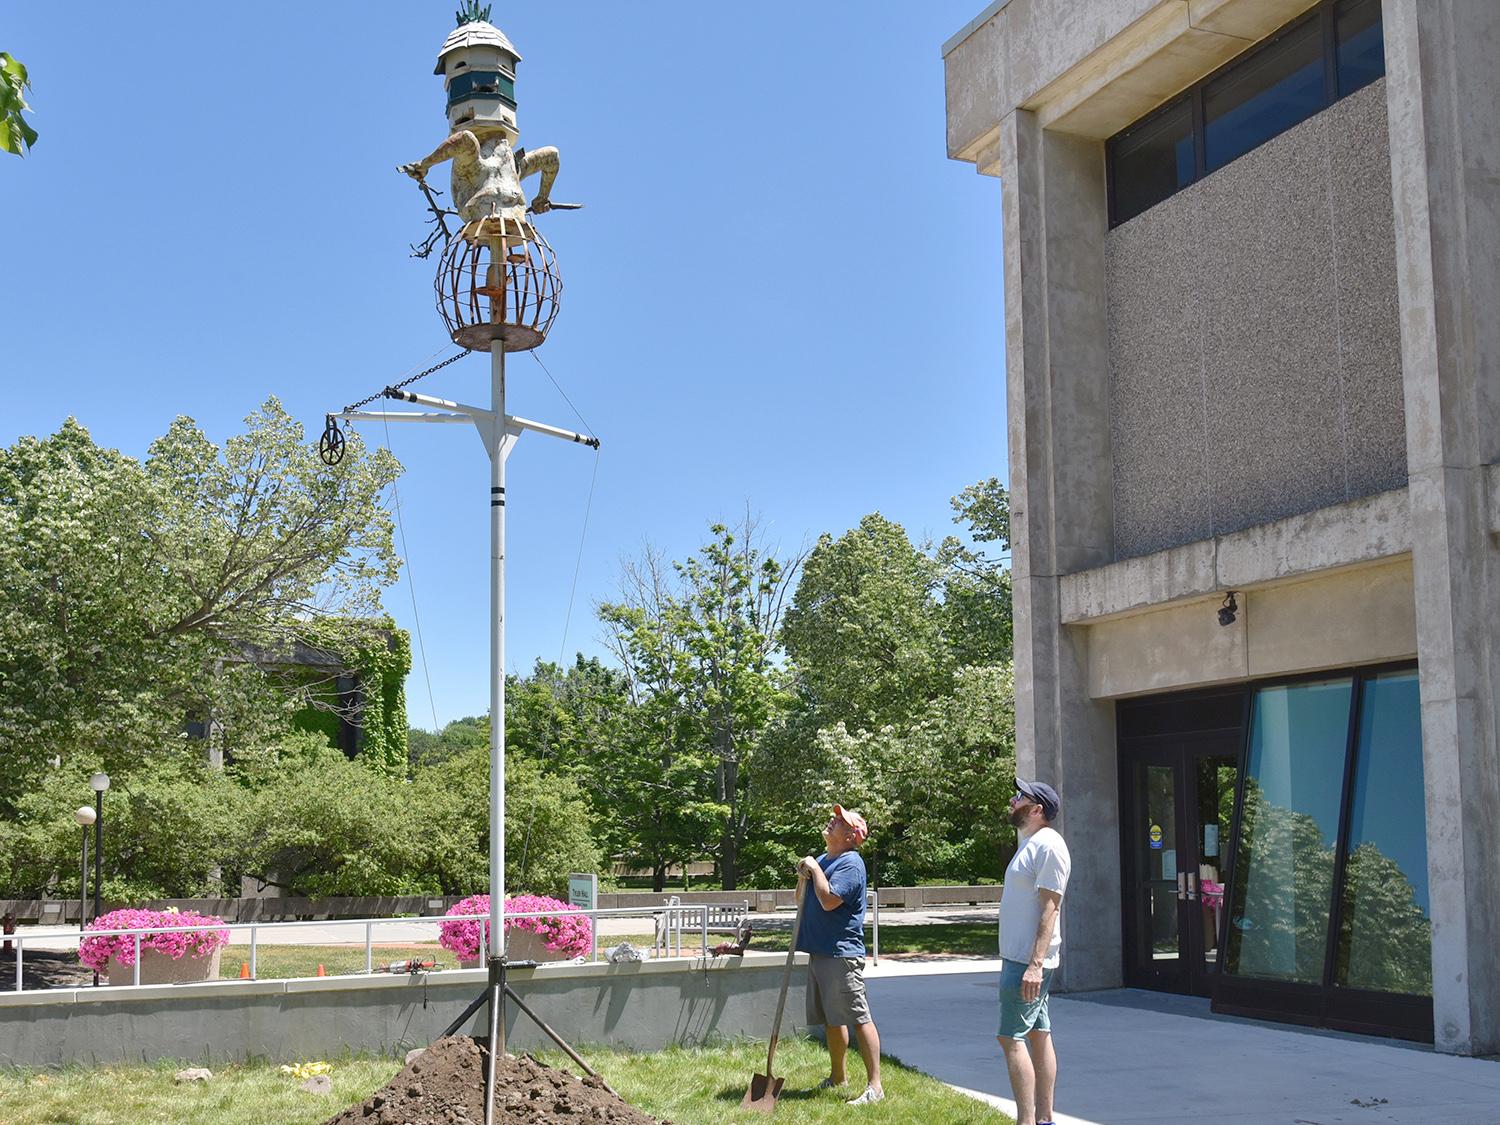 New birdhouse sculpture donated to college